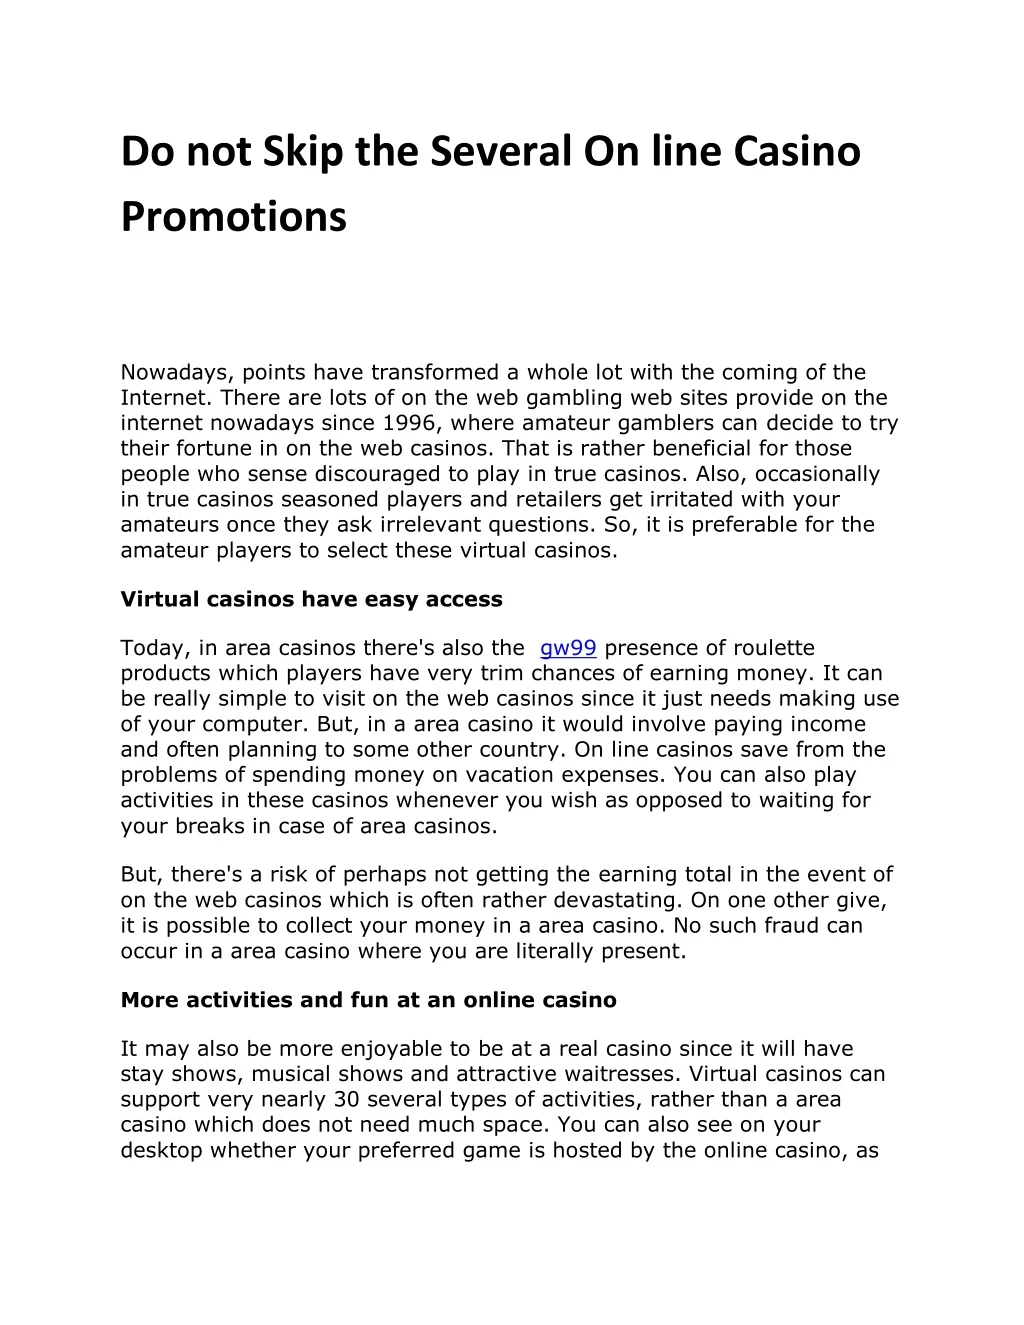 do not skip the several on line casino promotions